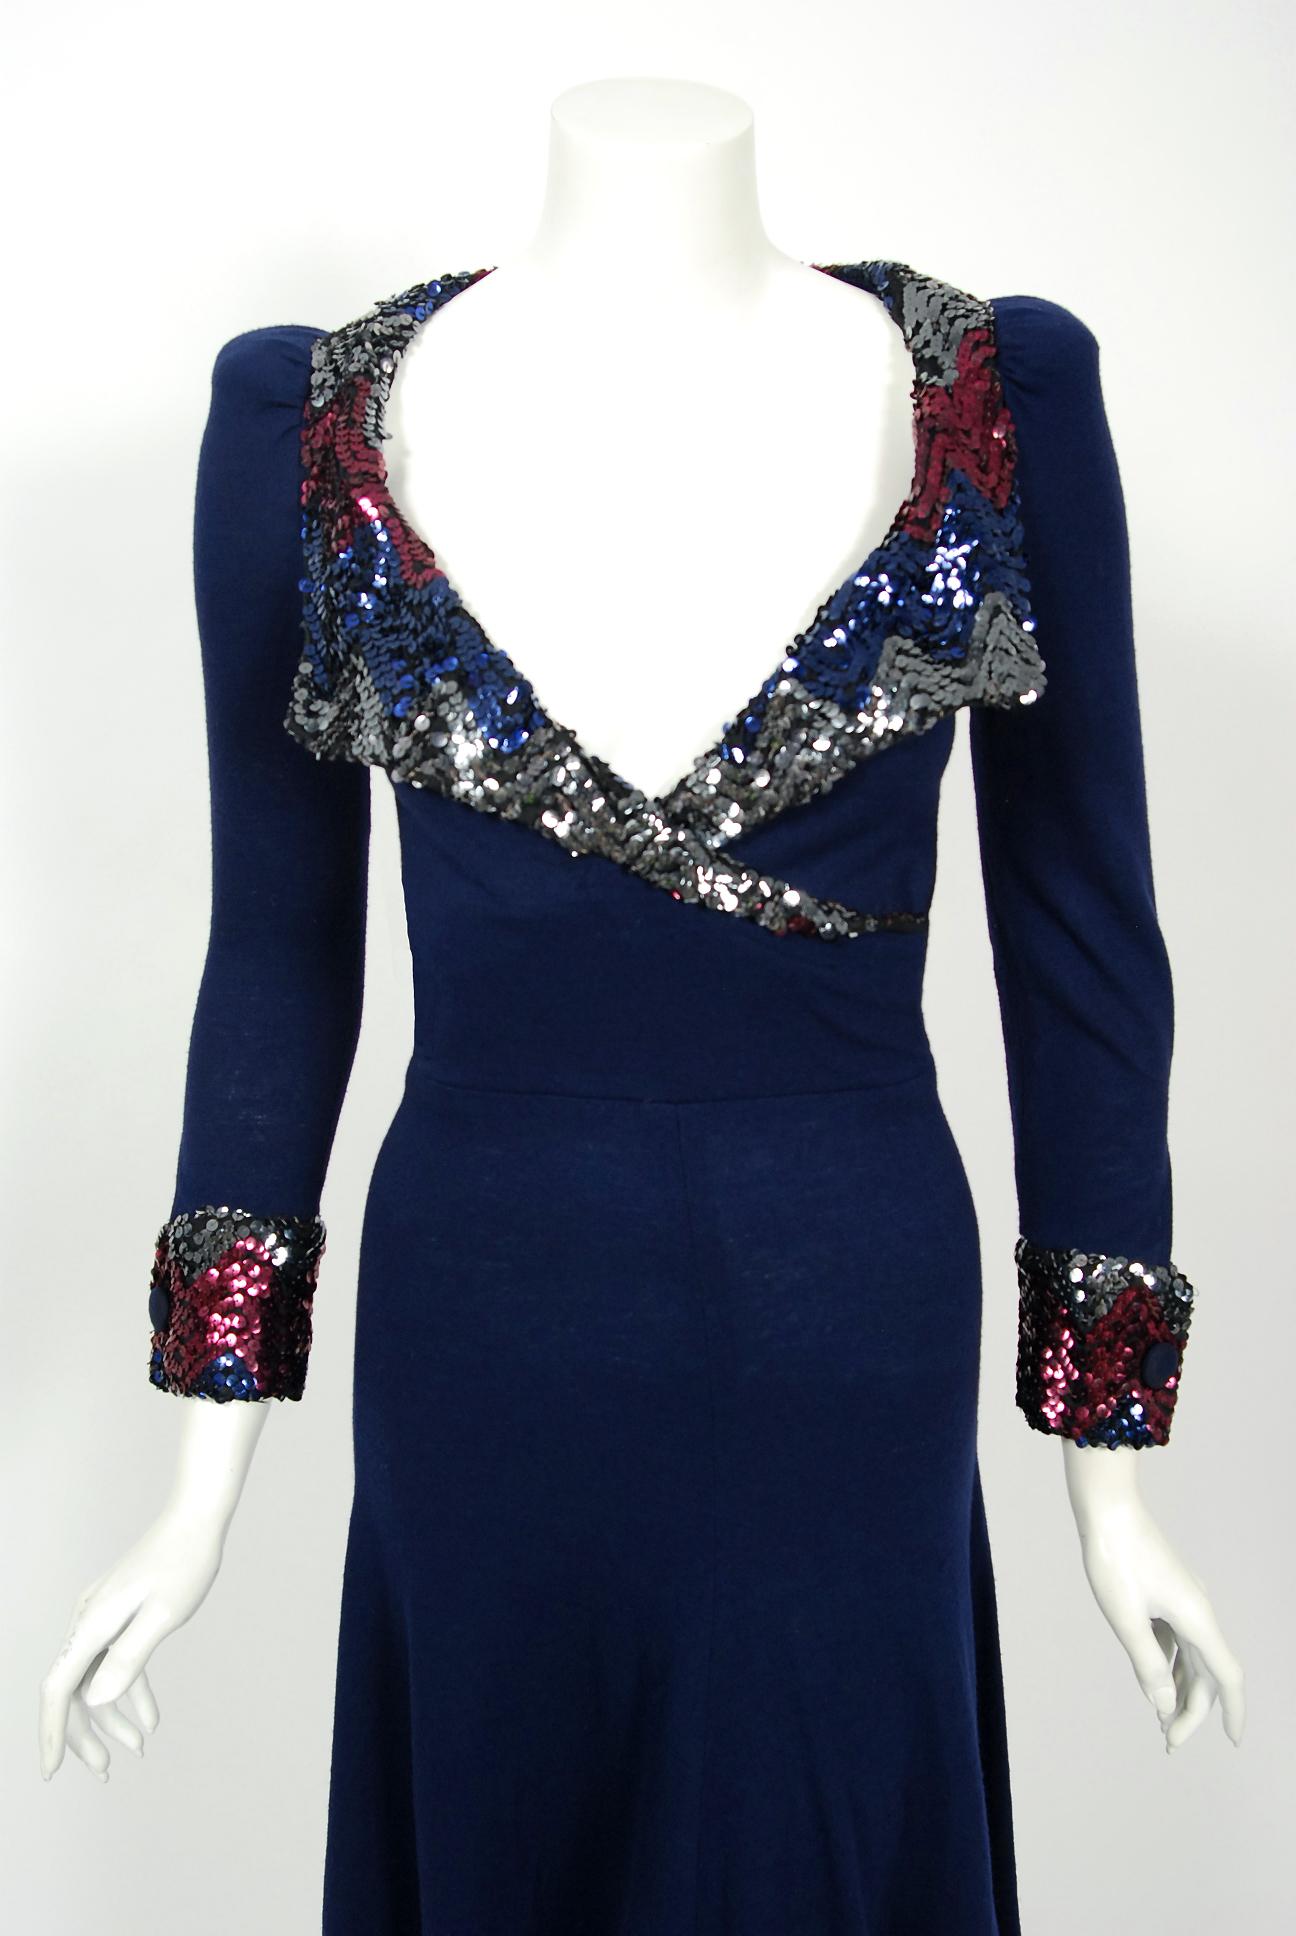 If you were an “It Girl” in London during the 1960's and 1970's, Biba is where you would have shopped. This sensational navy-blue swool dress is a perfect example of the brand's genius. The fabric has a flattering stretch with all the classic